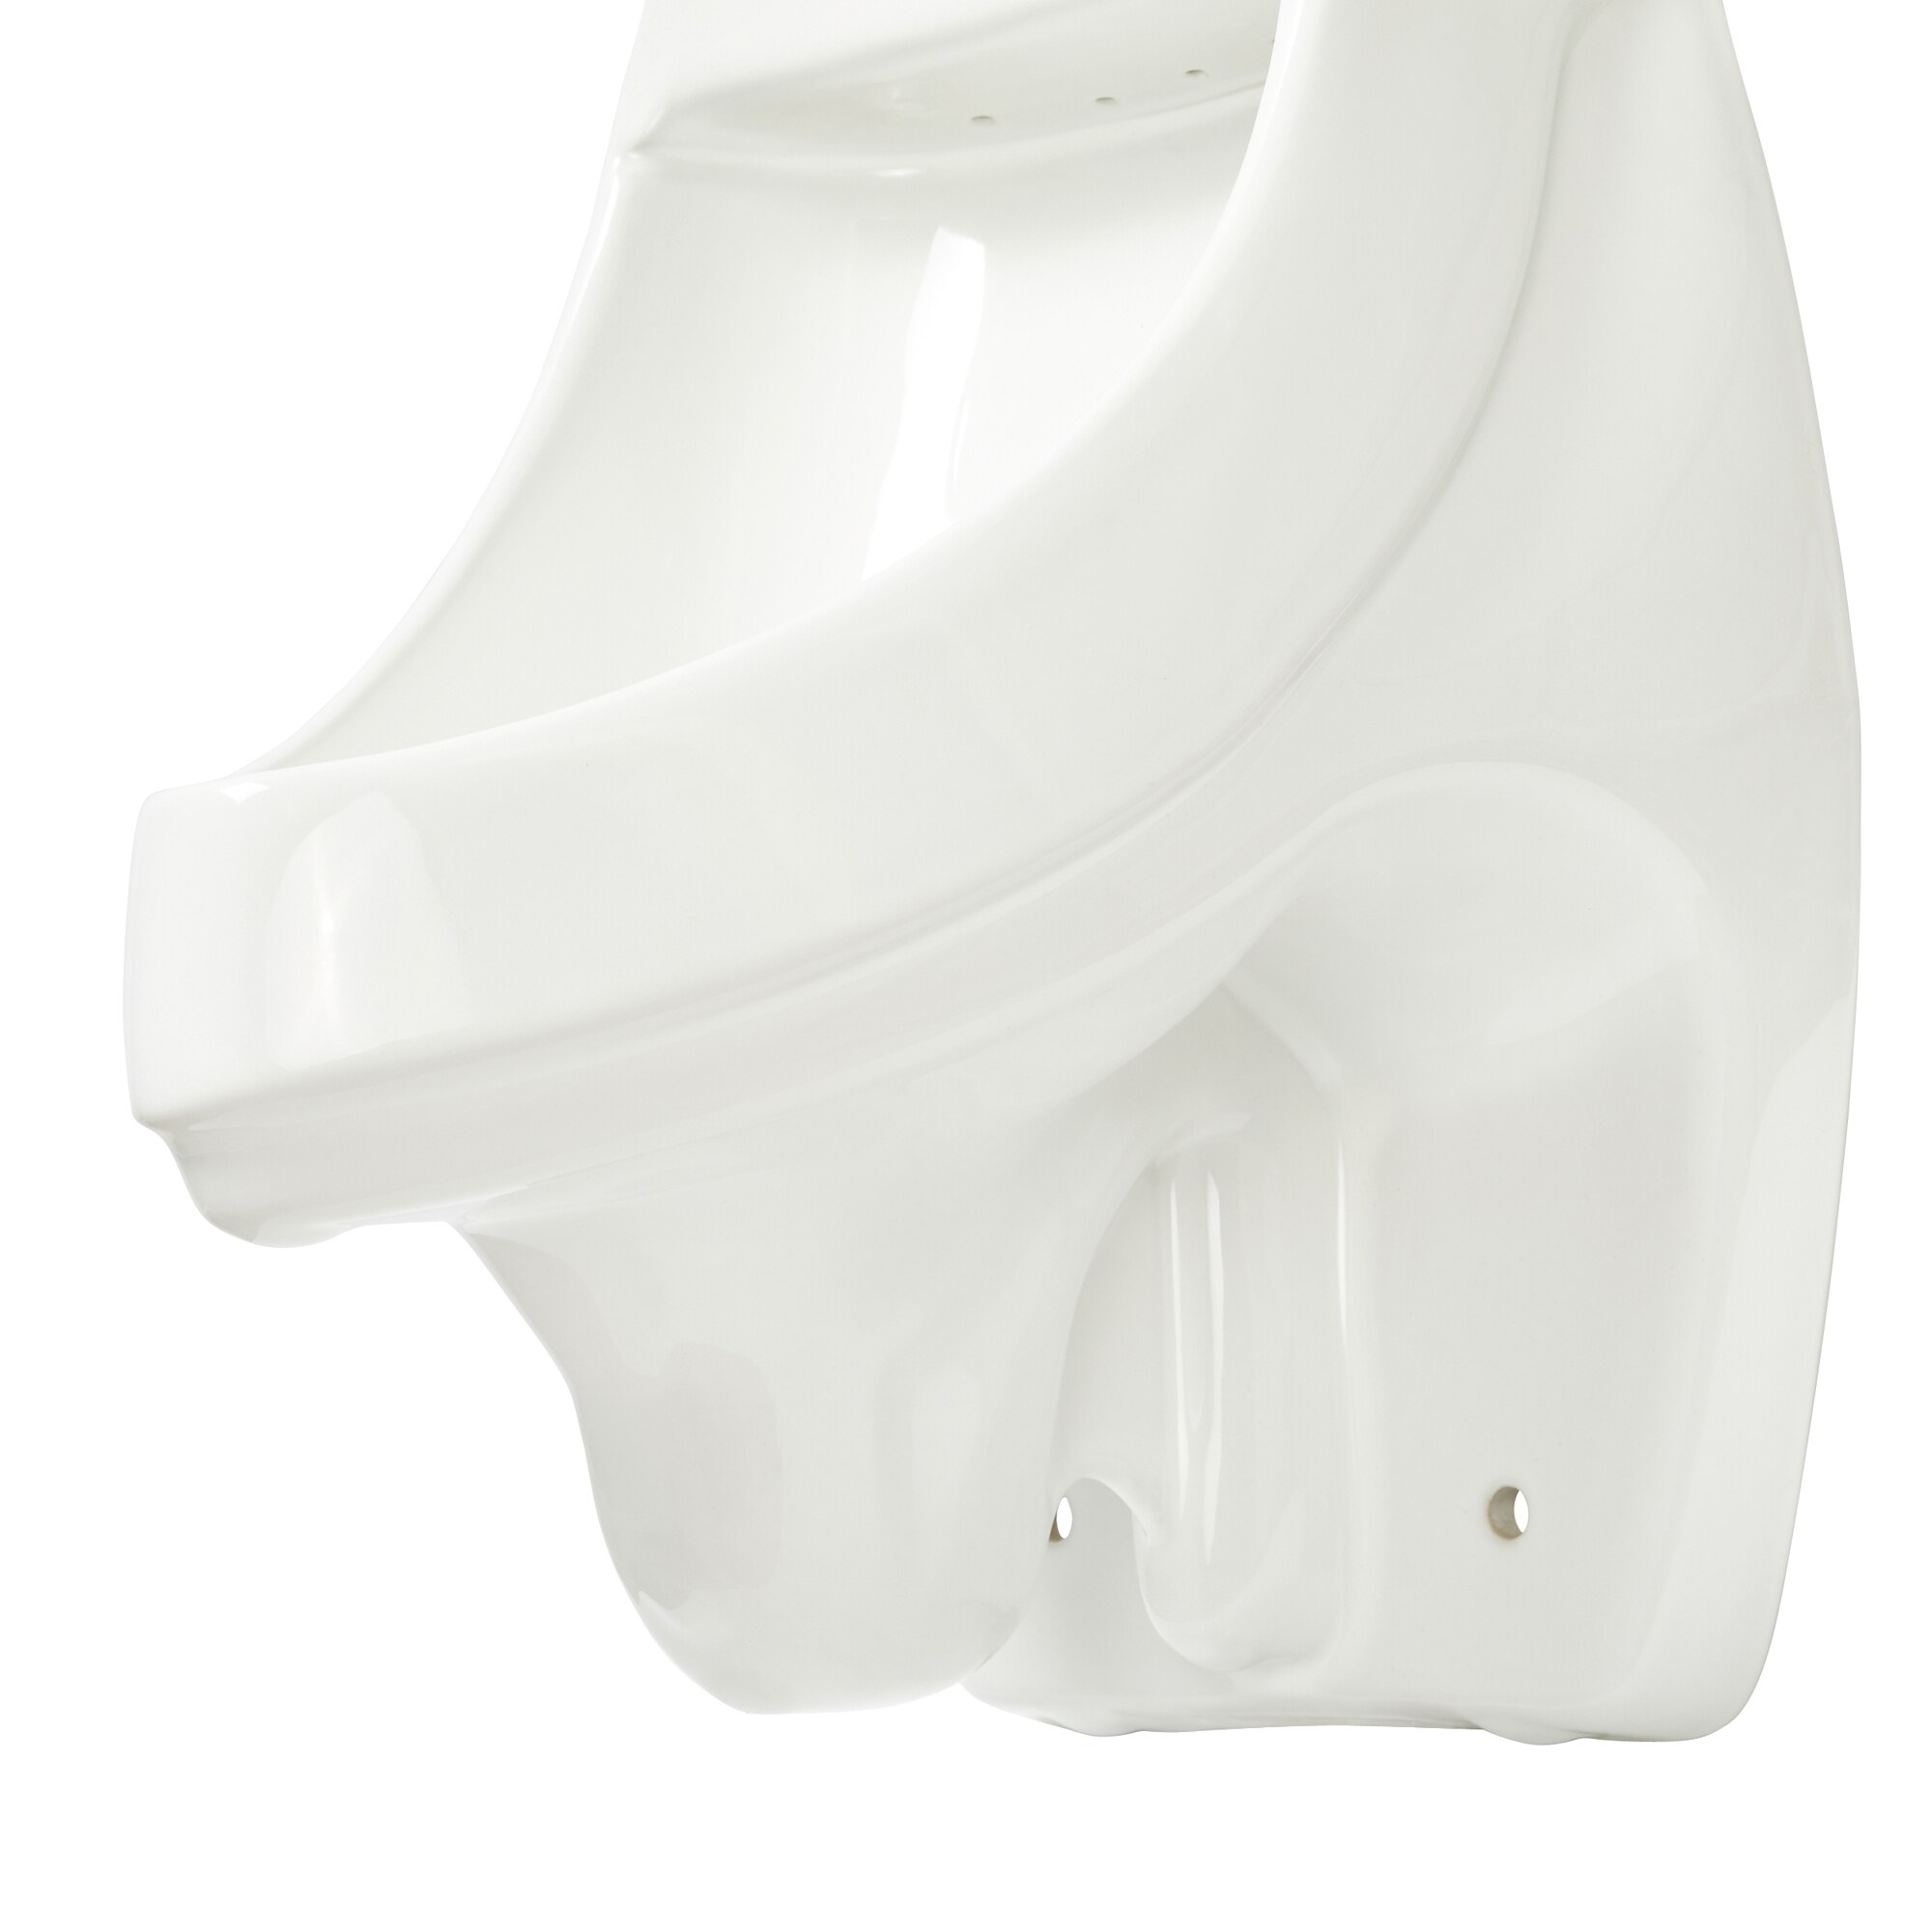 KOHLER 13.5-in x 20.375-in White Wall-mounted Urinal in the 